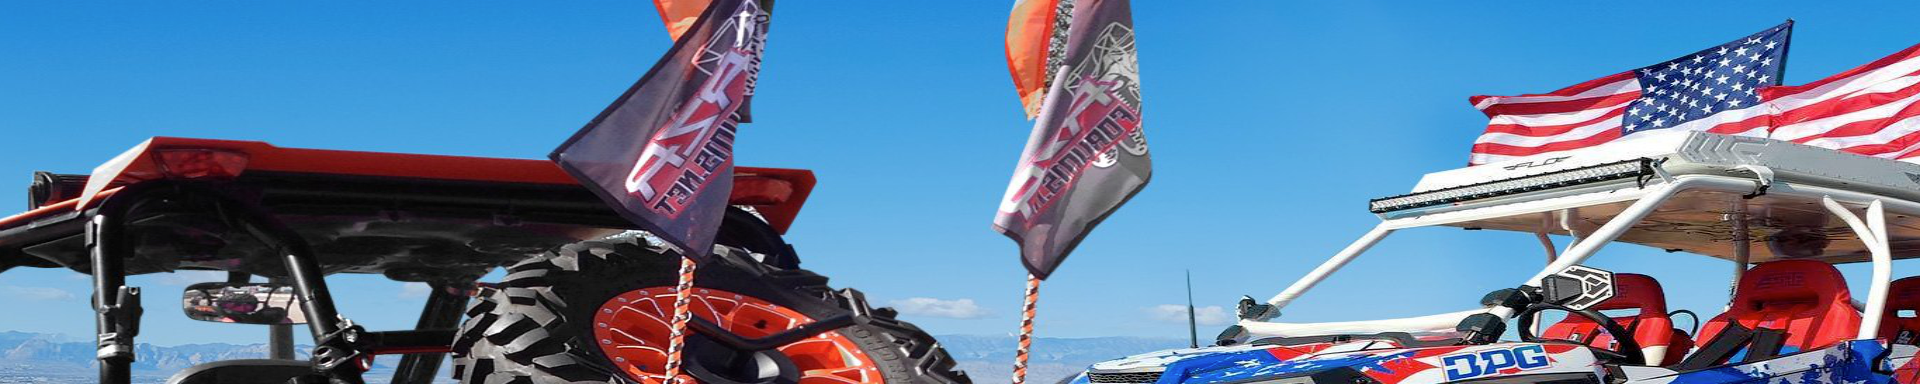 Flags, Banners & Signs | MunroPowersports.com | Munro Industries mp-1008030109